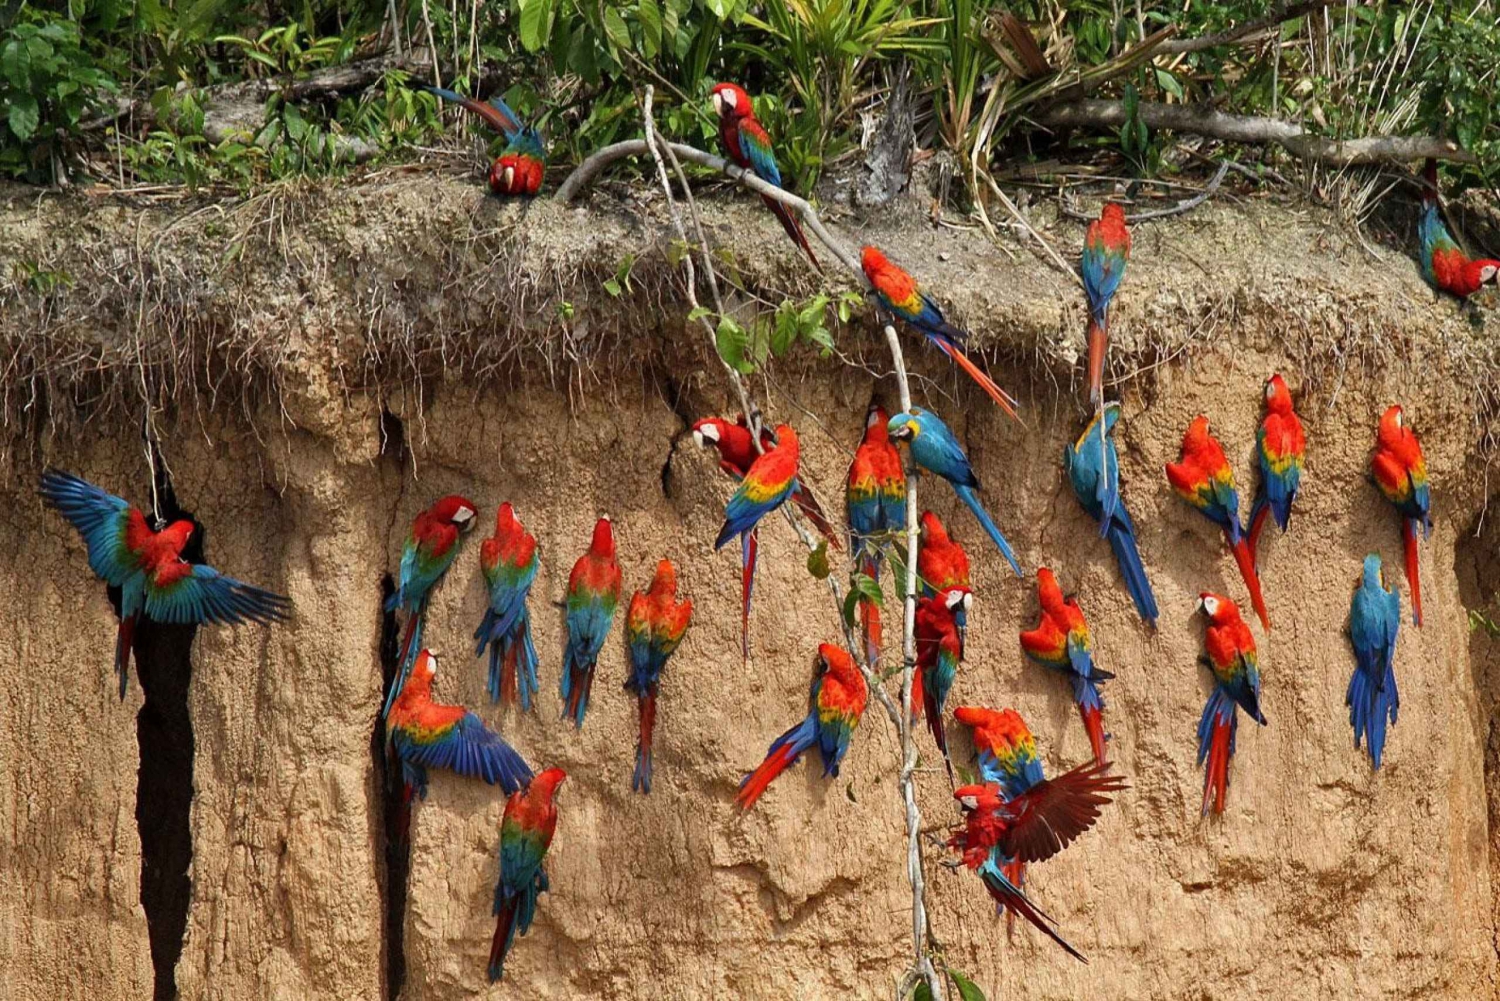 Excursion to the Chuncho clay lick for parrots and macaws.